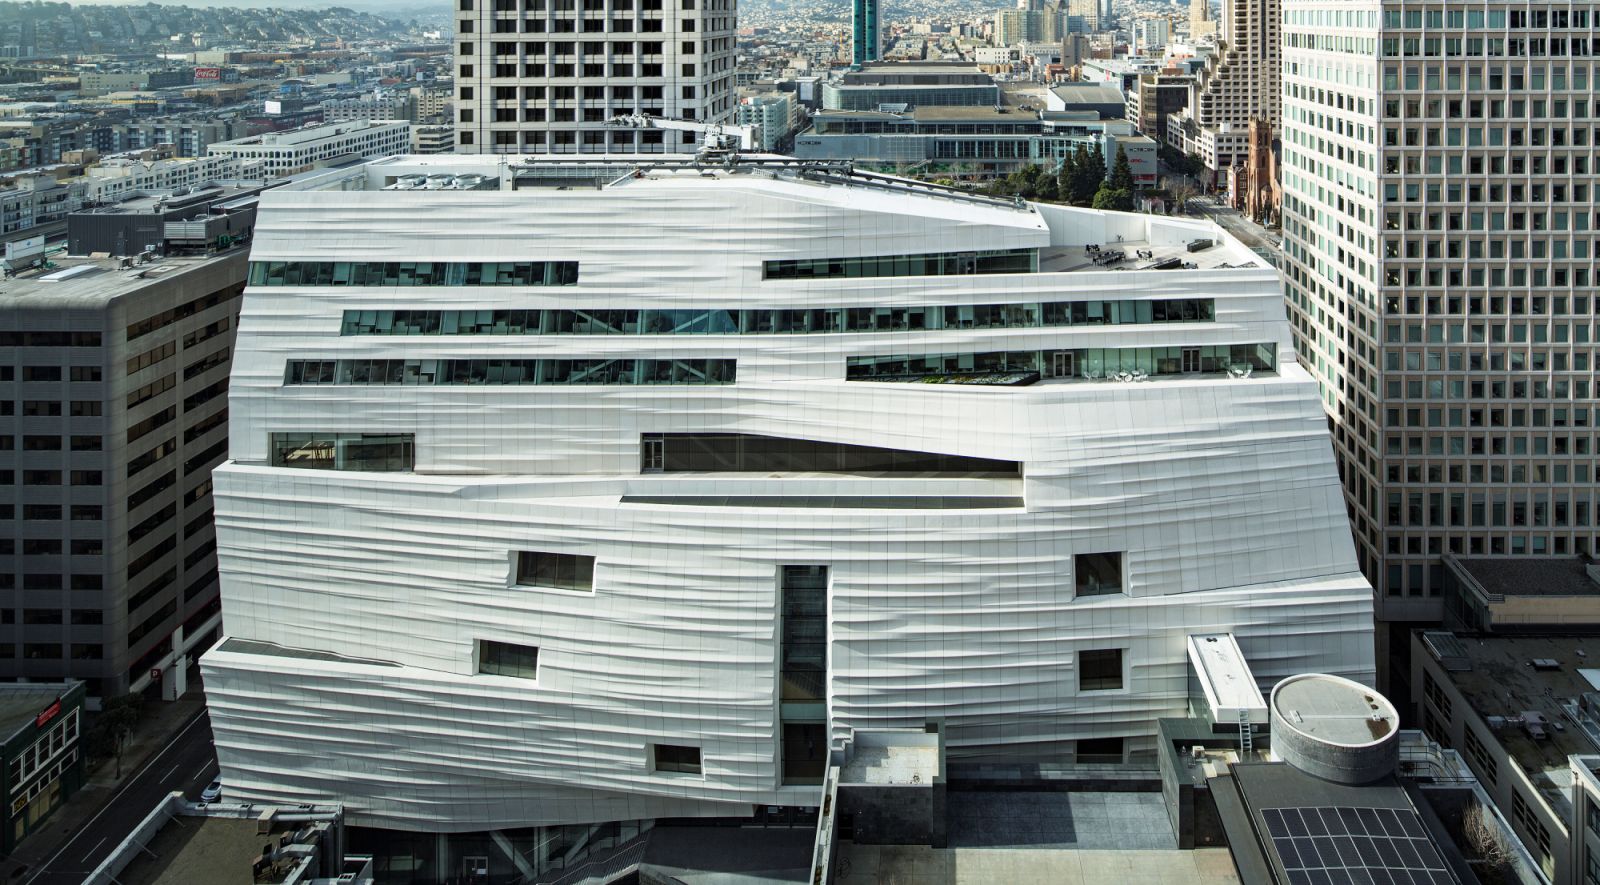 Expansion to the San Francisco Museum of Modern Art